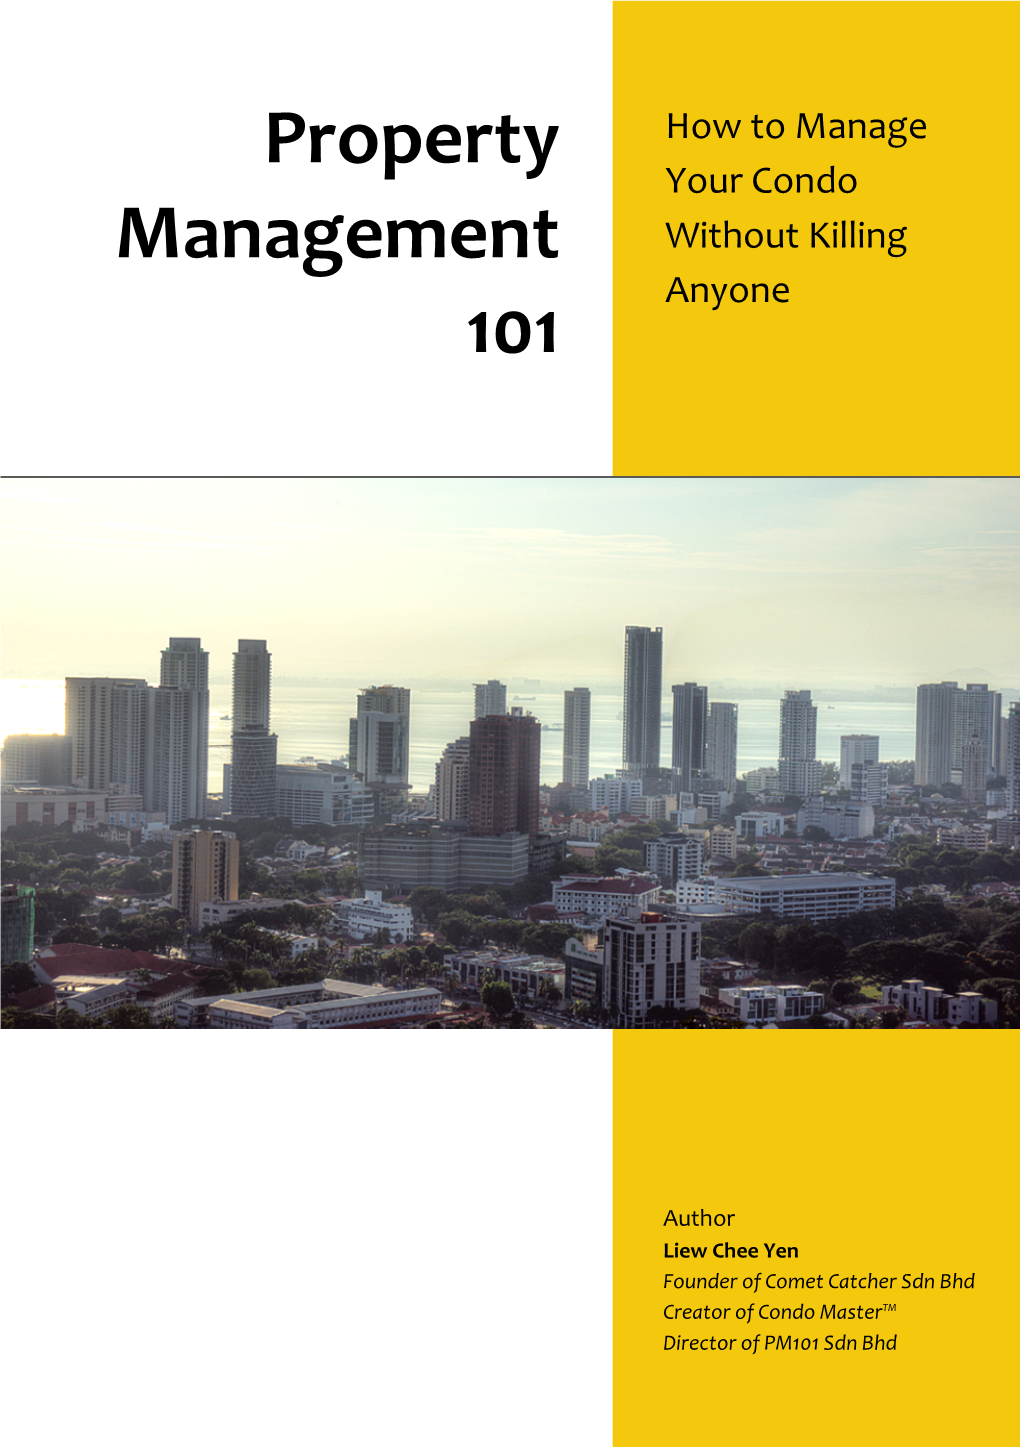 Property Management 101 How to Manage Your Condo Without Killing Anyone